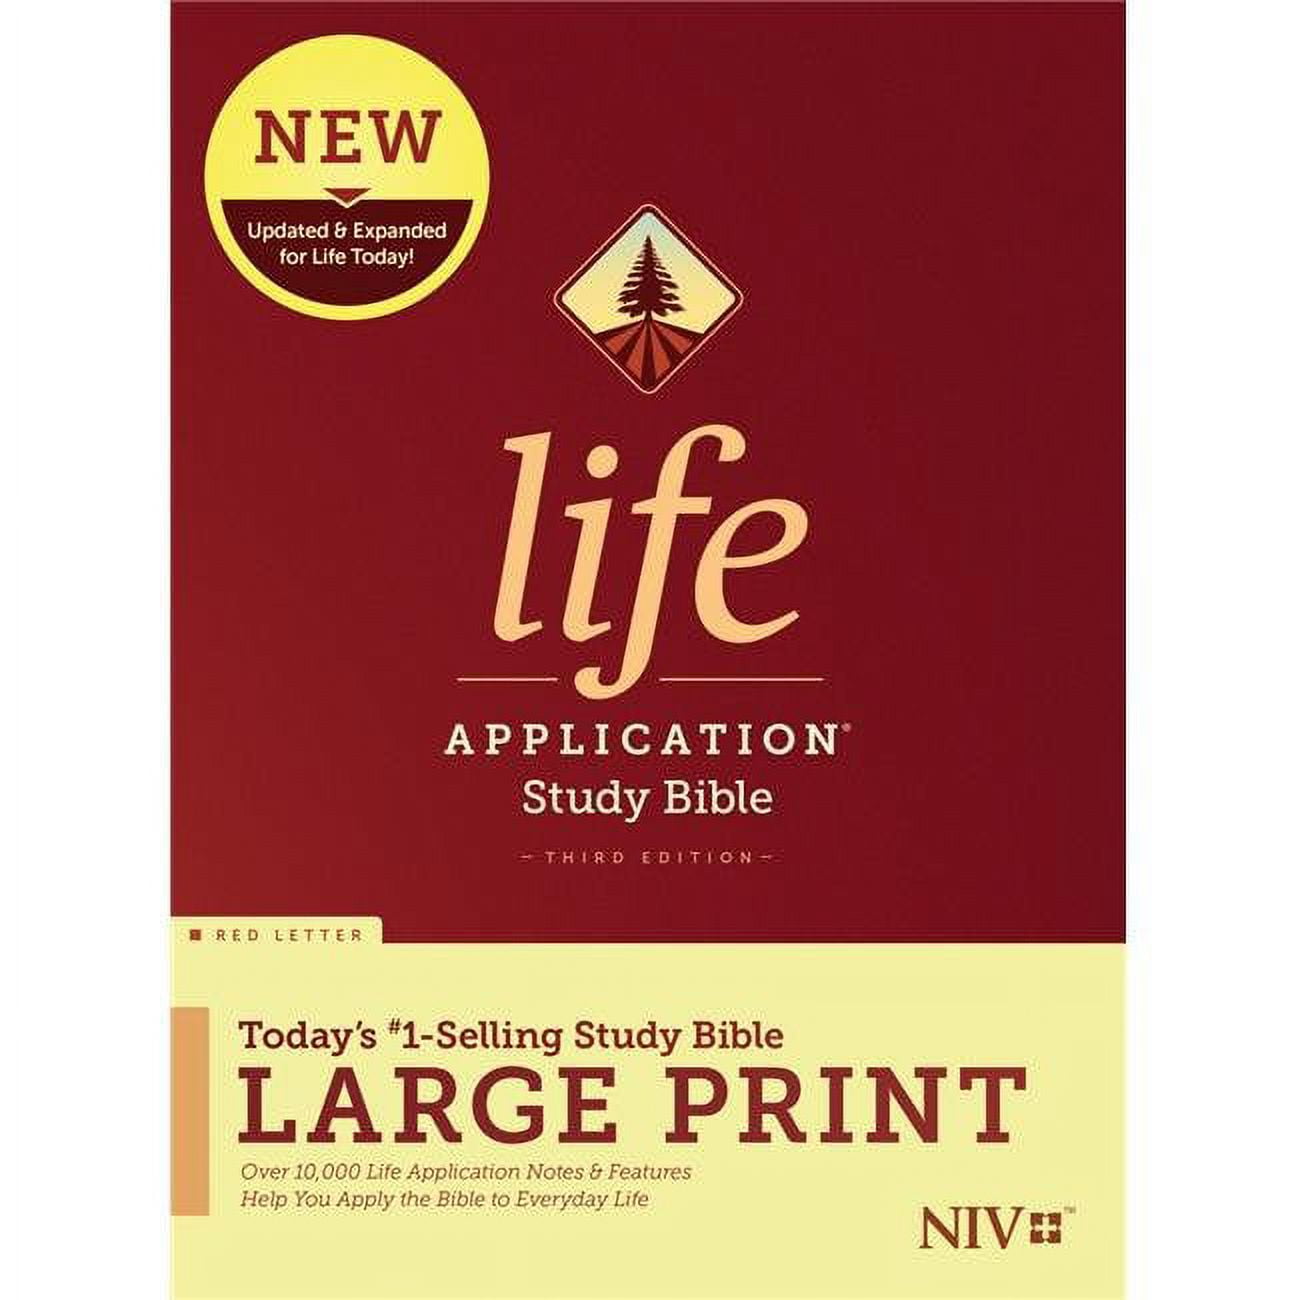 NIV Life Application Study Bible - Large Print - Third Edition, Red Letter Hardcover - Apr 2020 -  Friends are Forever, FR1535888